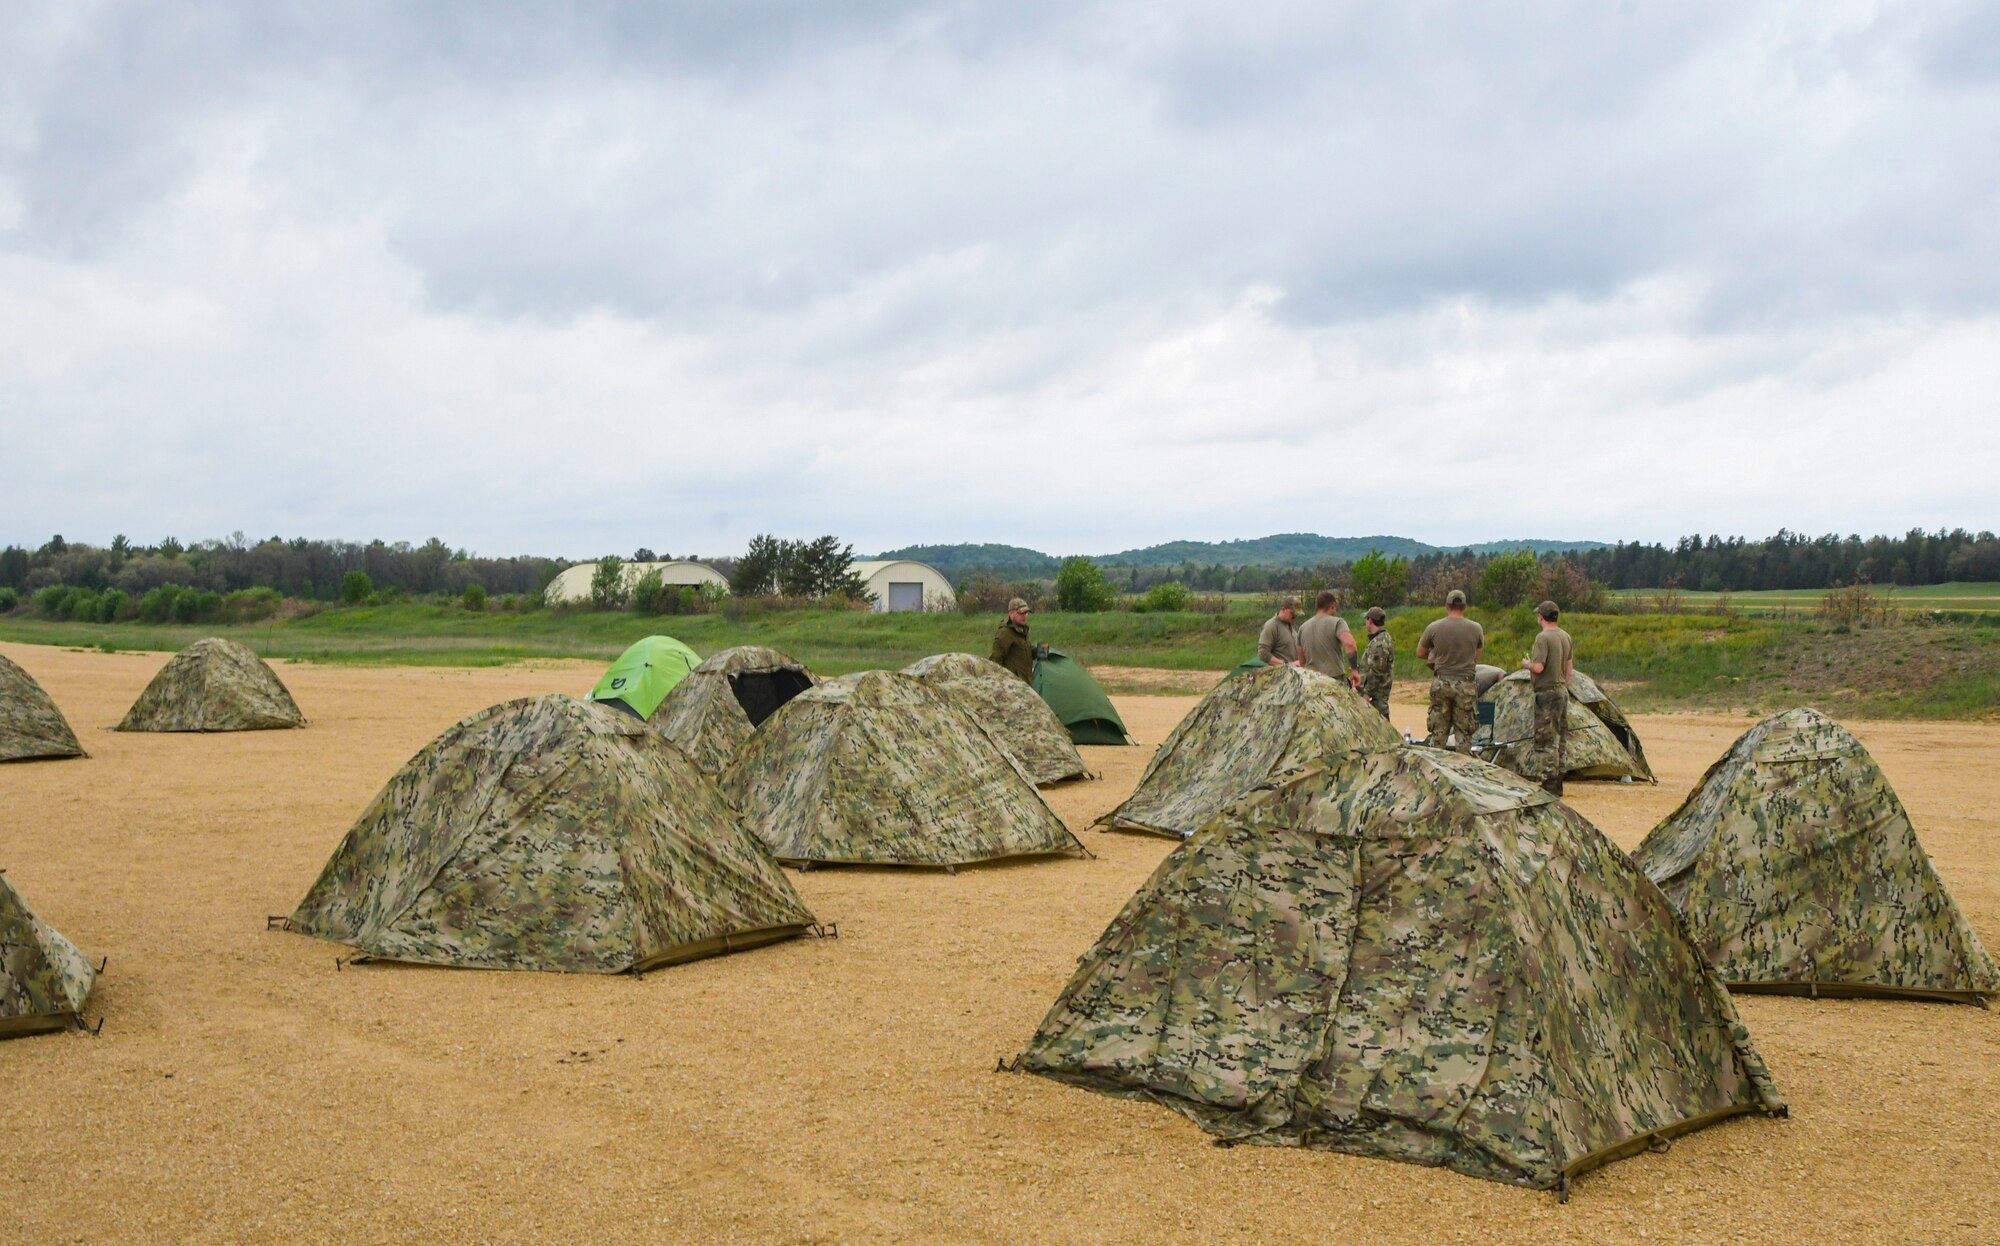 A photo of a group of tents